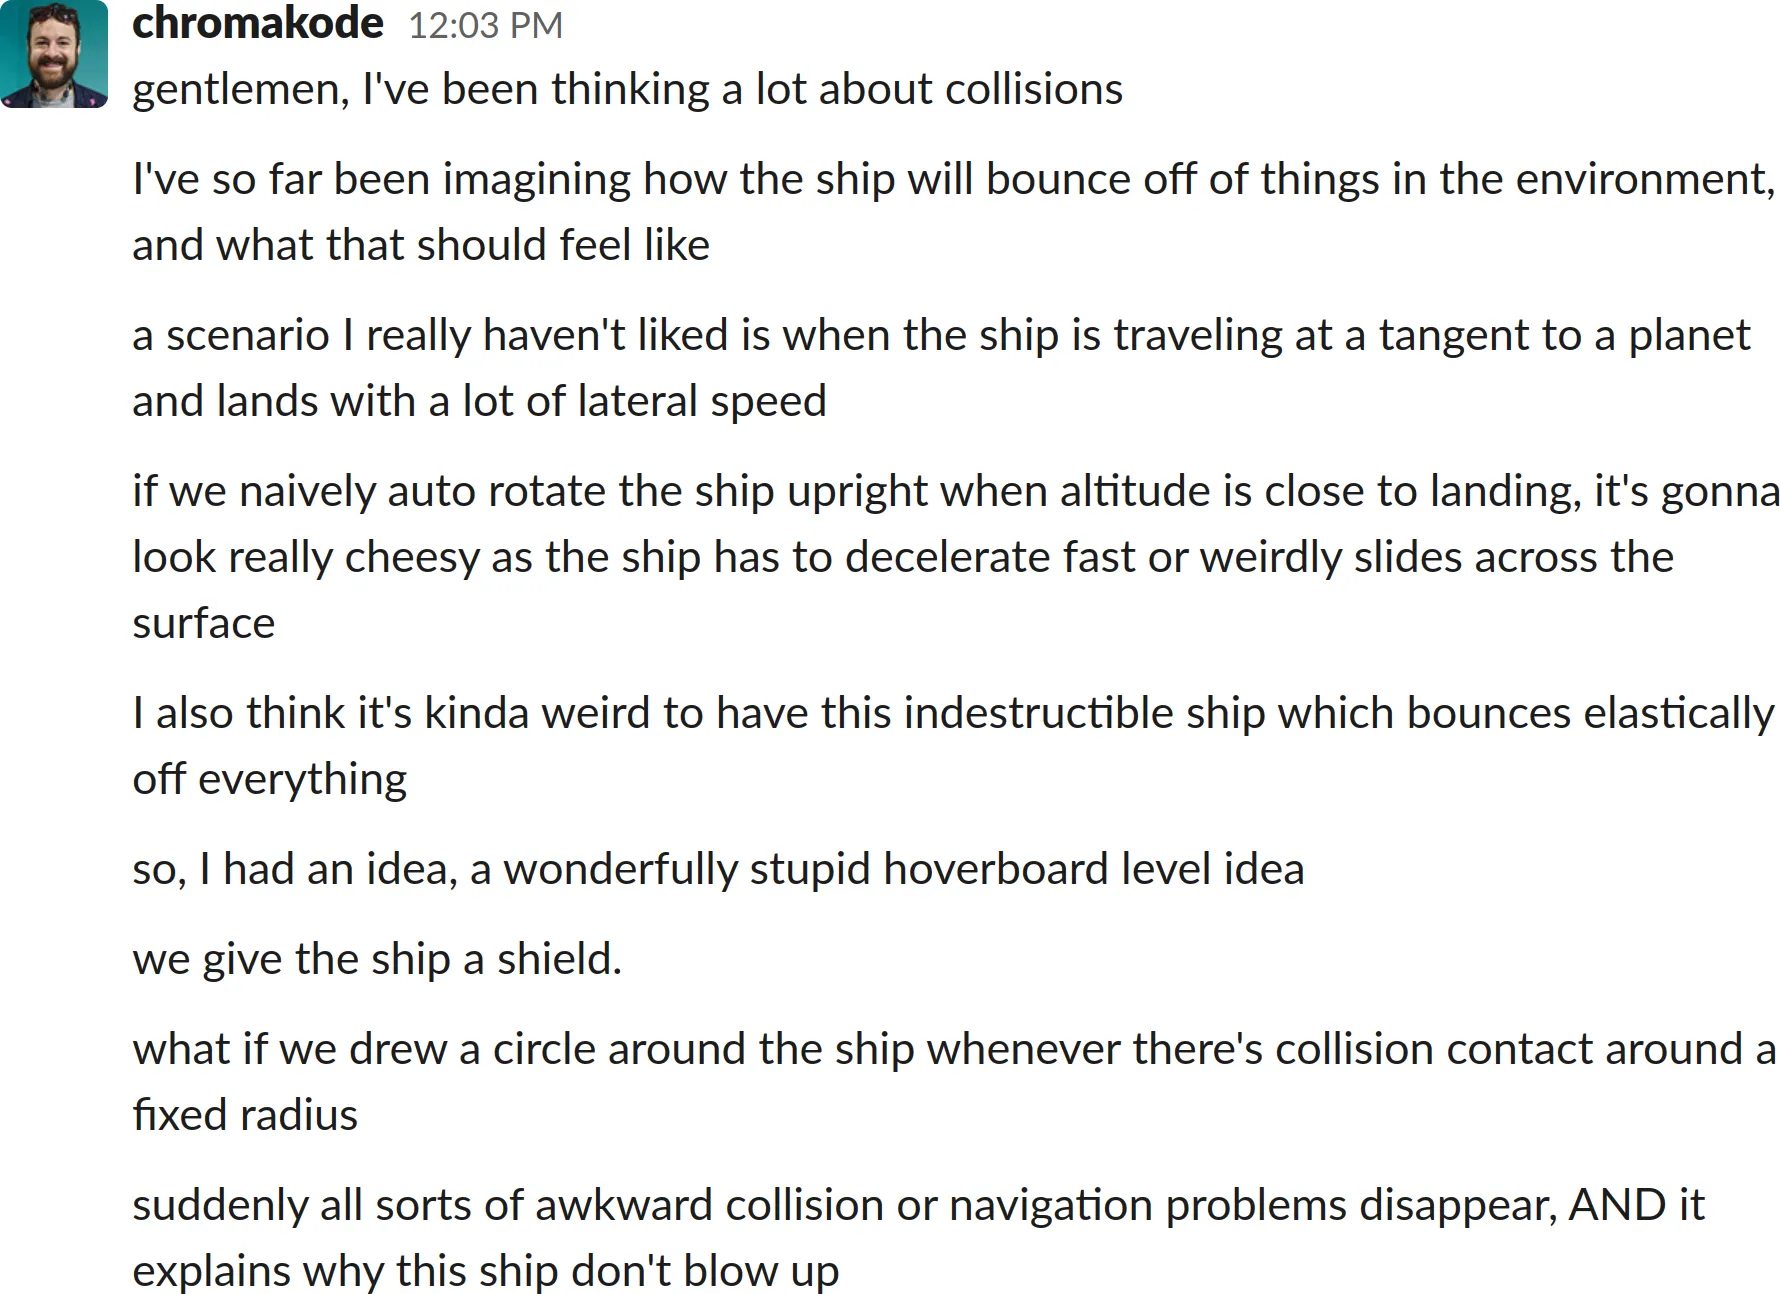 A screenshot of a Slack chat log transcript:
gentlemen, I&#x27;ve been thinking a lot about collisions
I&#x27;ve so far been imagining how the ship will bounce off of things in the environment, and what that should feel like
a scenario I really haven&#x27;t liked is when the ship is traveling at a tangent to a planet and lands with a lot of lateral speed
if we naively auto rotate the ship upright when altitude is close to landing, it&#x27;s gonna look really cheesy as the ship has to decelerate fast or weirdly slides across the surface
I also think it&#x27;s kinda weird to have this indestructible ship which bounces elastically off everything
so, I had an idea, a wonderfully stupid hoverboard level idea
we give the ship a shield.
what if we drew a circle around the ship whenever there&#x27;s collision contact around a fixed radius
suddenly all sorts of awkward collision or navigation problems disappear, AND it explains why this ship don&#x27;t blow up